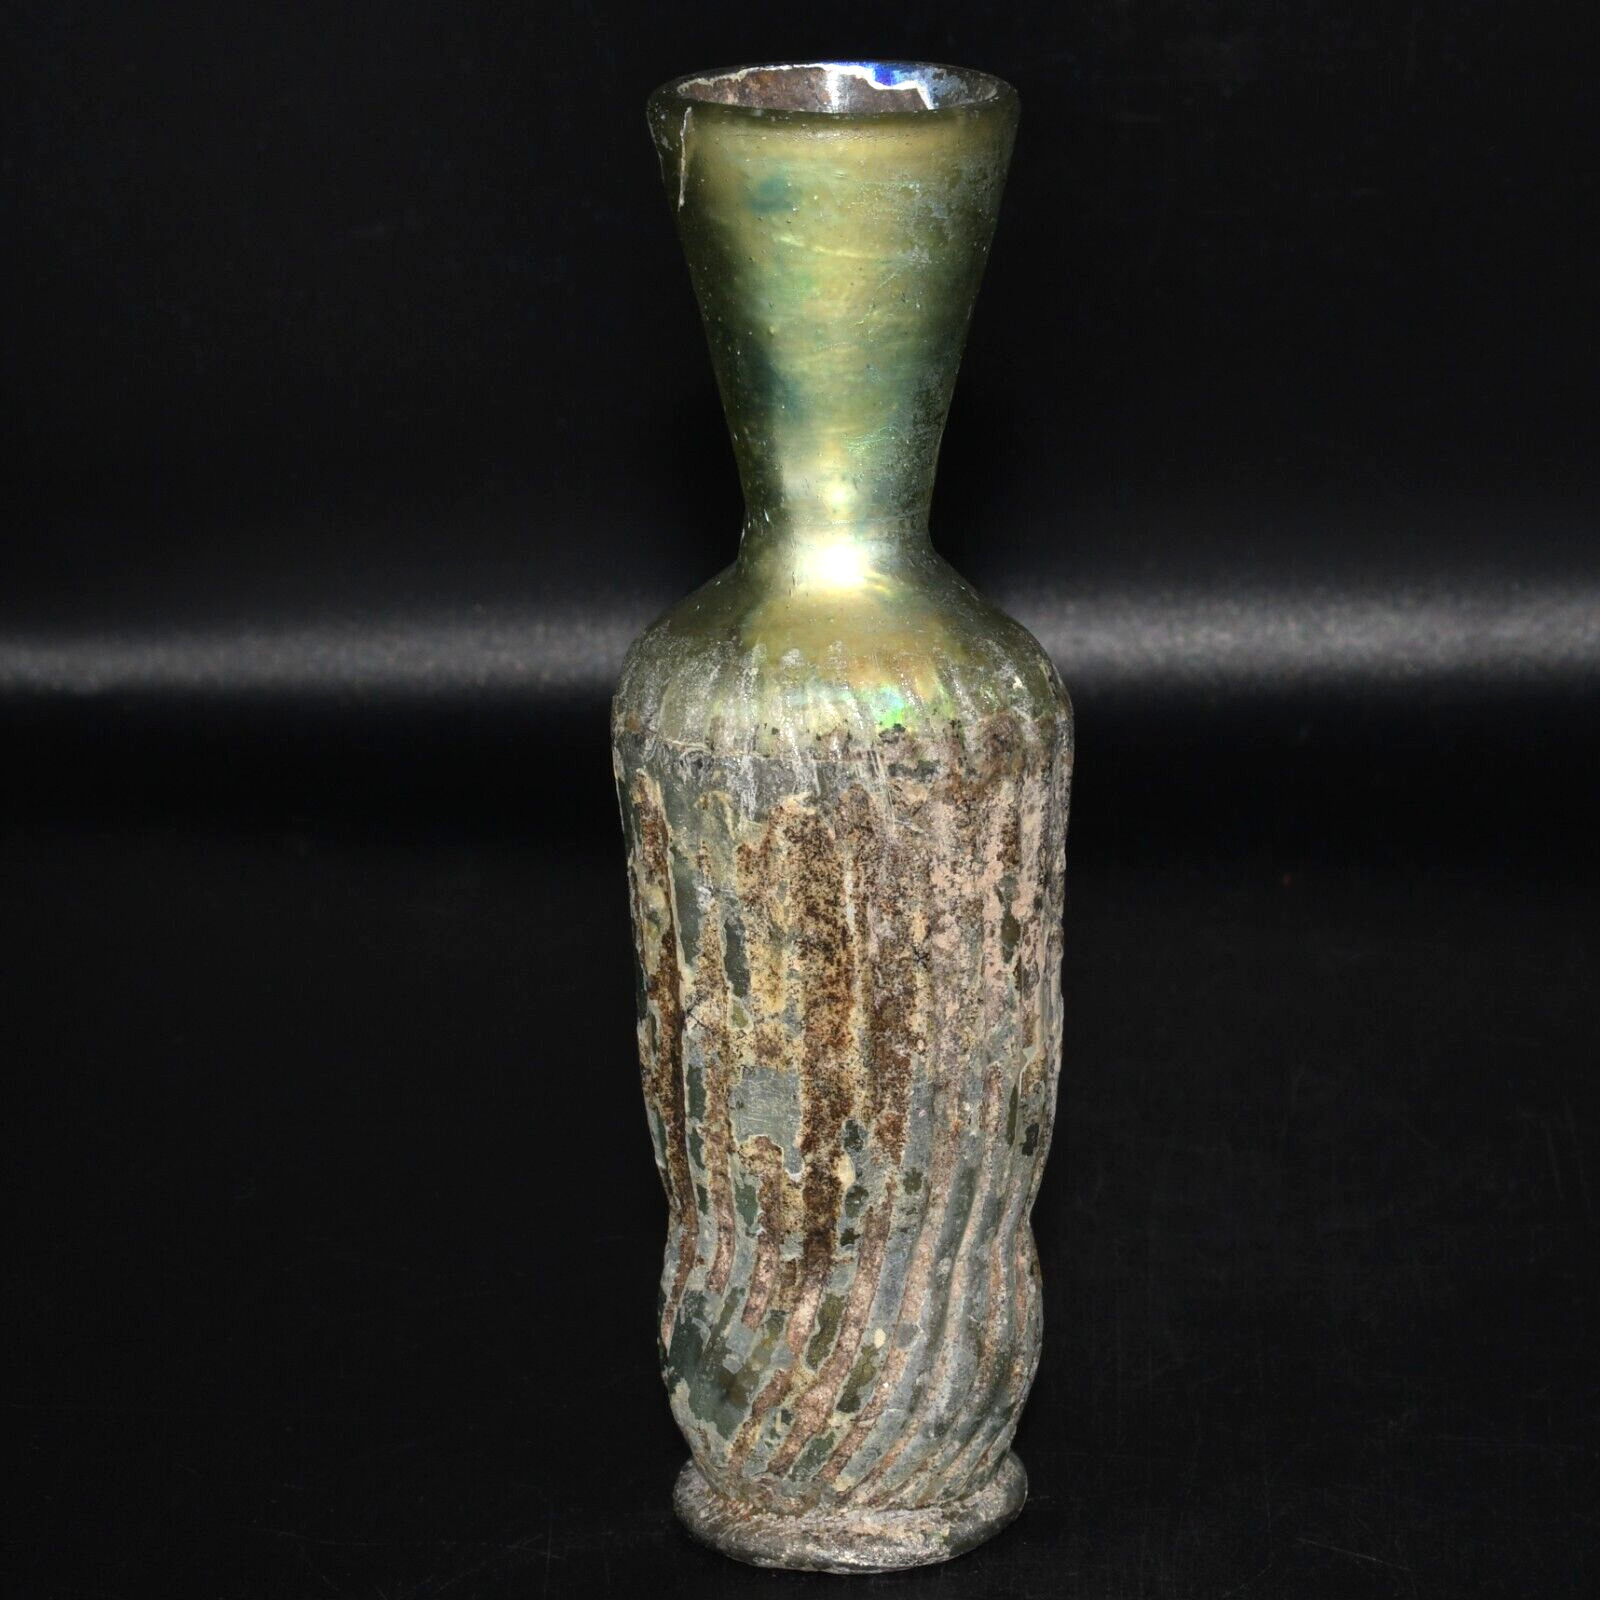 Large Authentic Ancient Roman Glass Bottle with Patina Ca. Early 1st Century AD